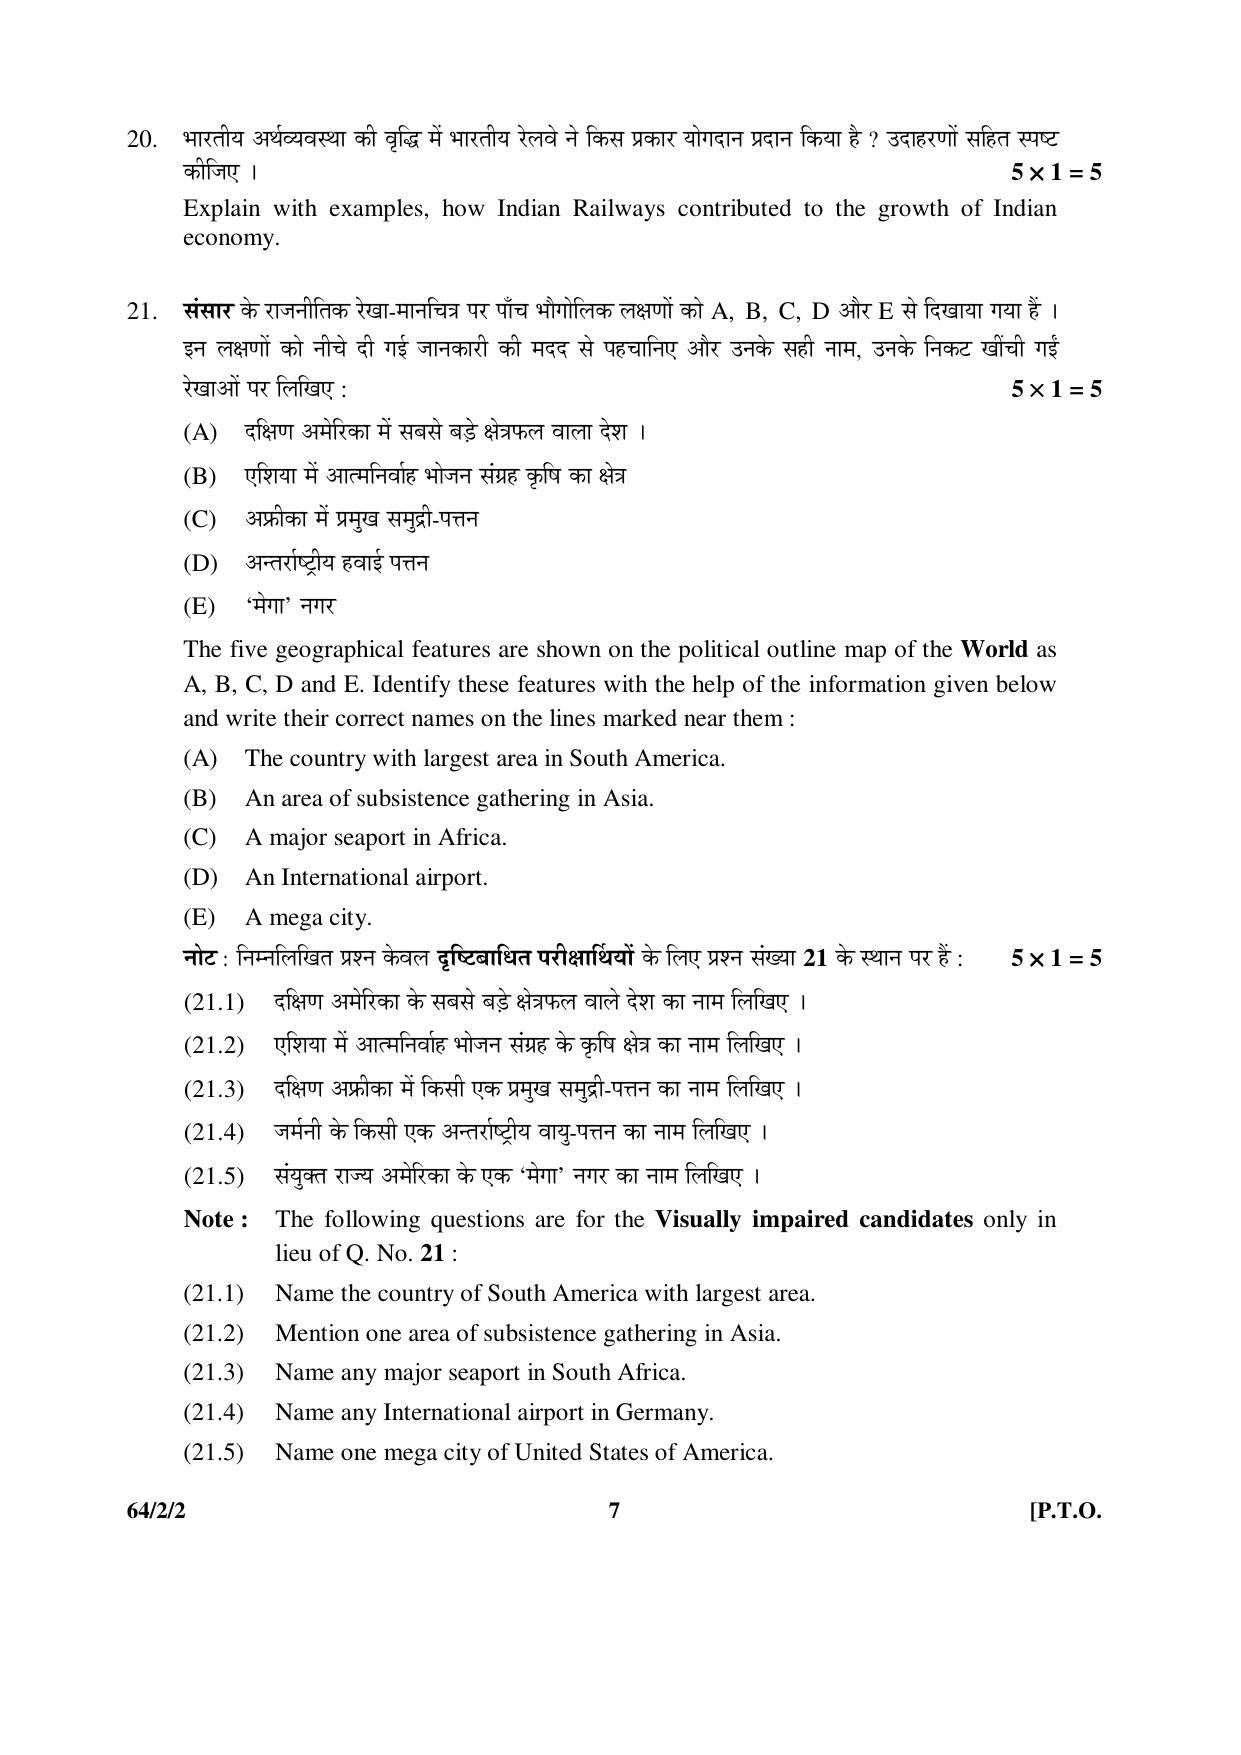 CBSE Class 12 64-2-2 Geography 2016 Question Paper - Page 7